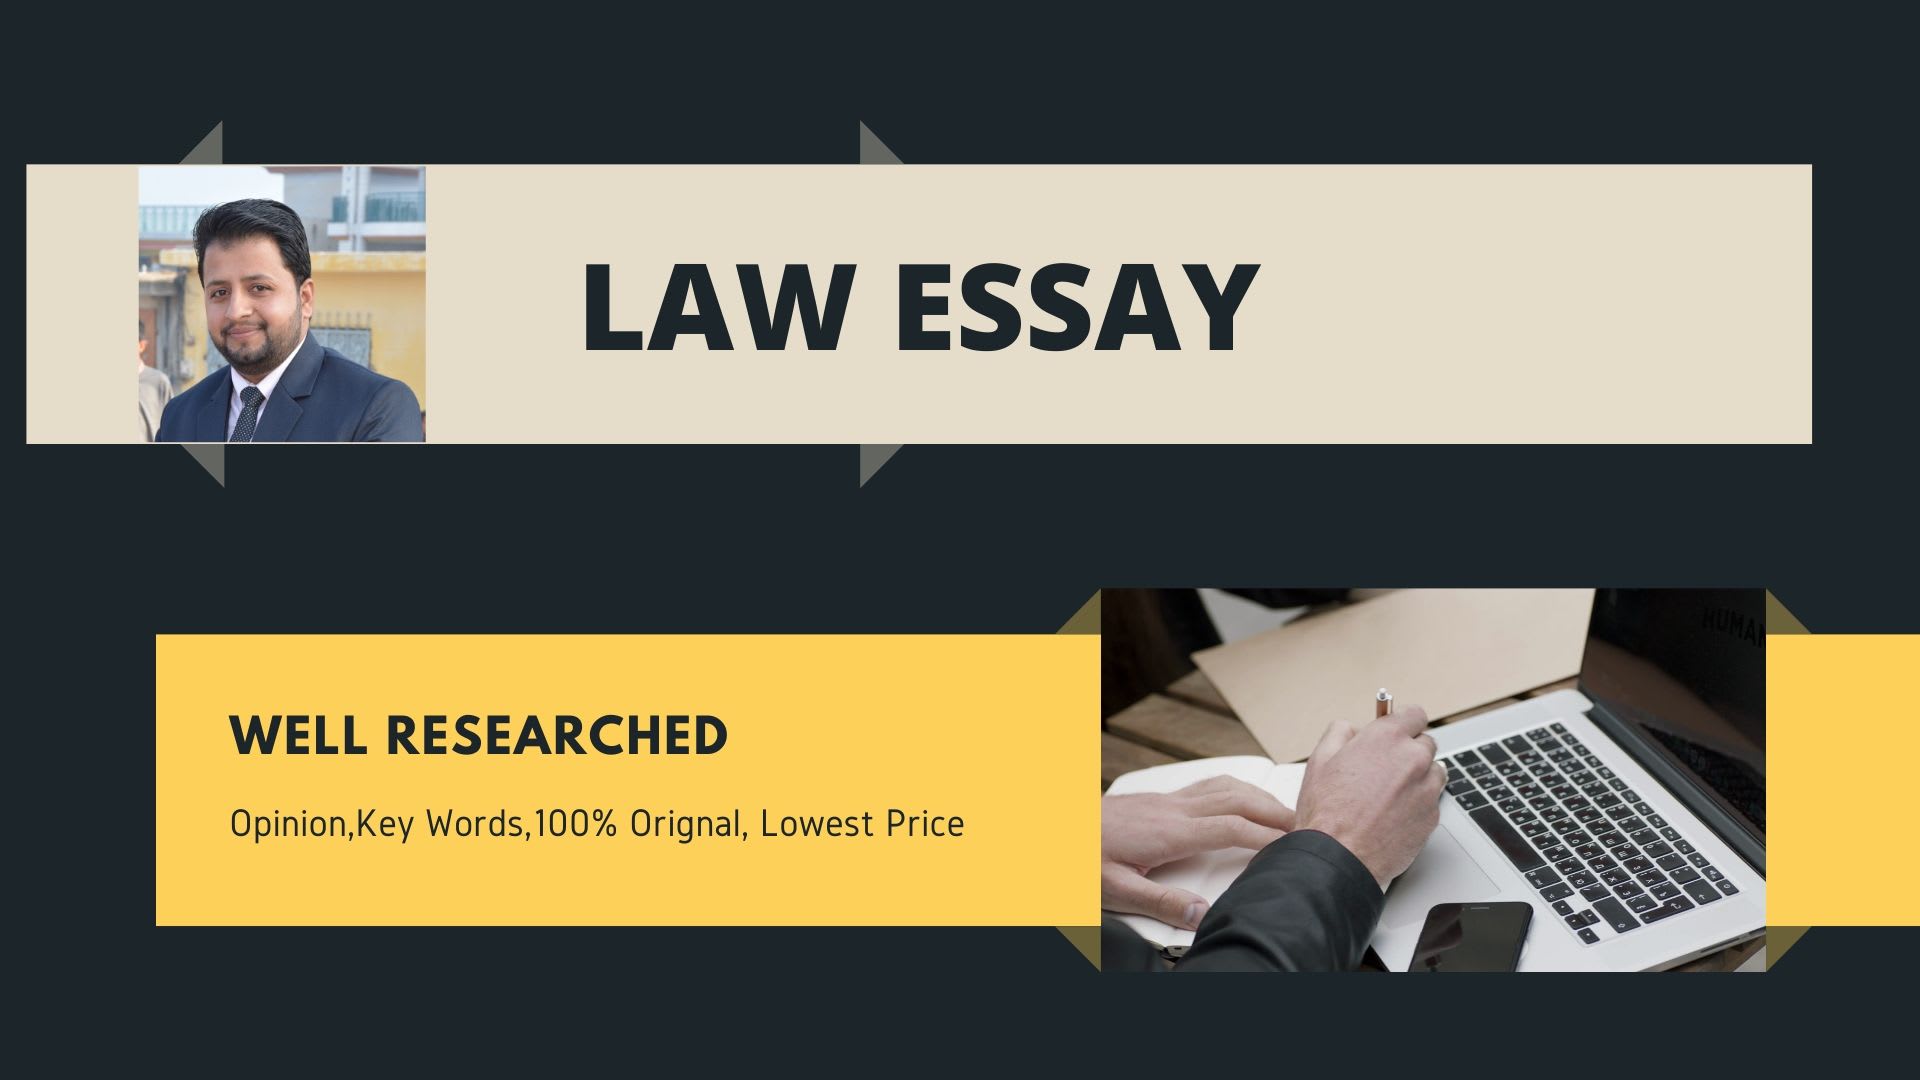 Write well researched law essay at the lowest price by